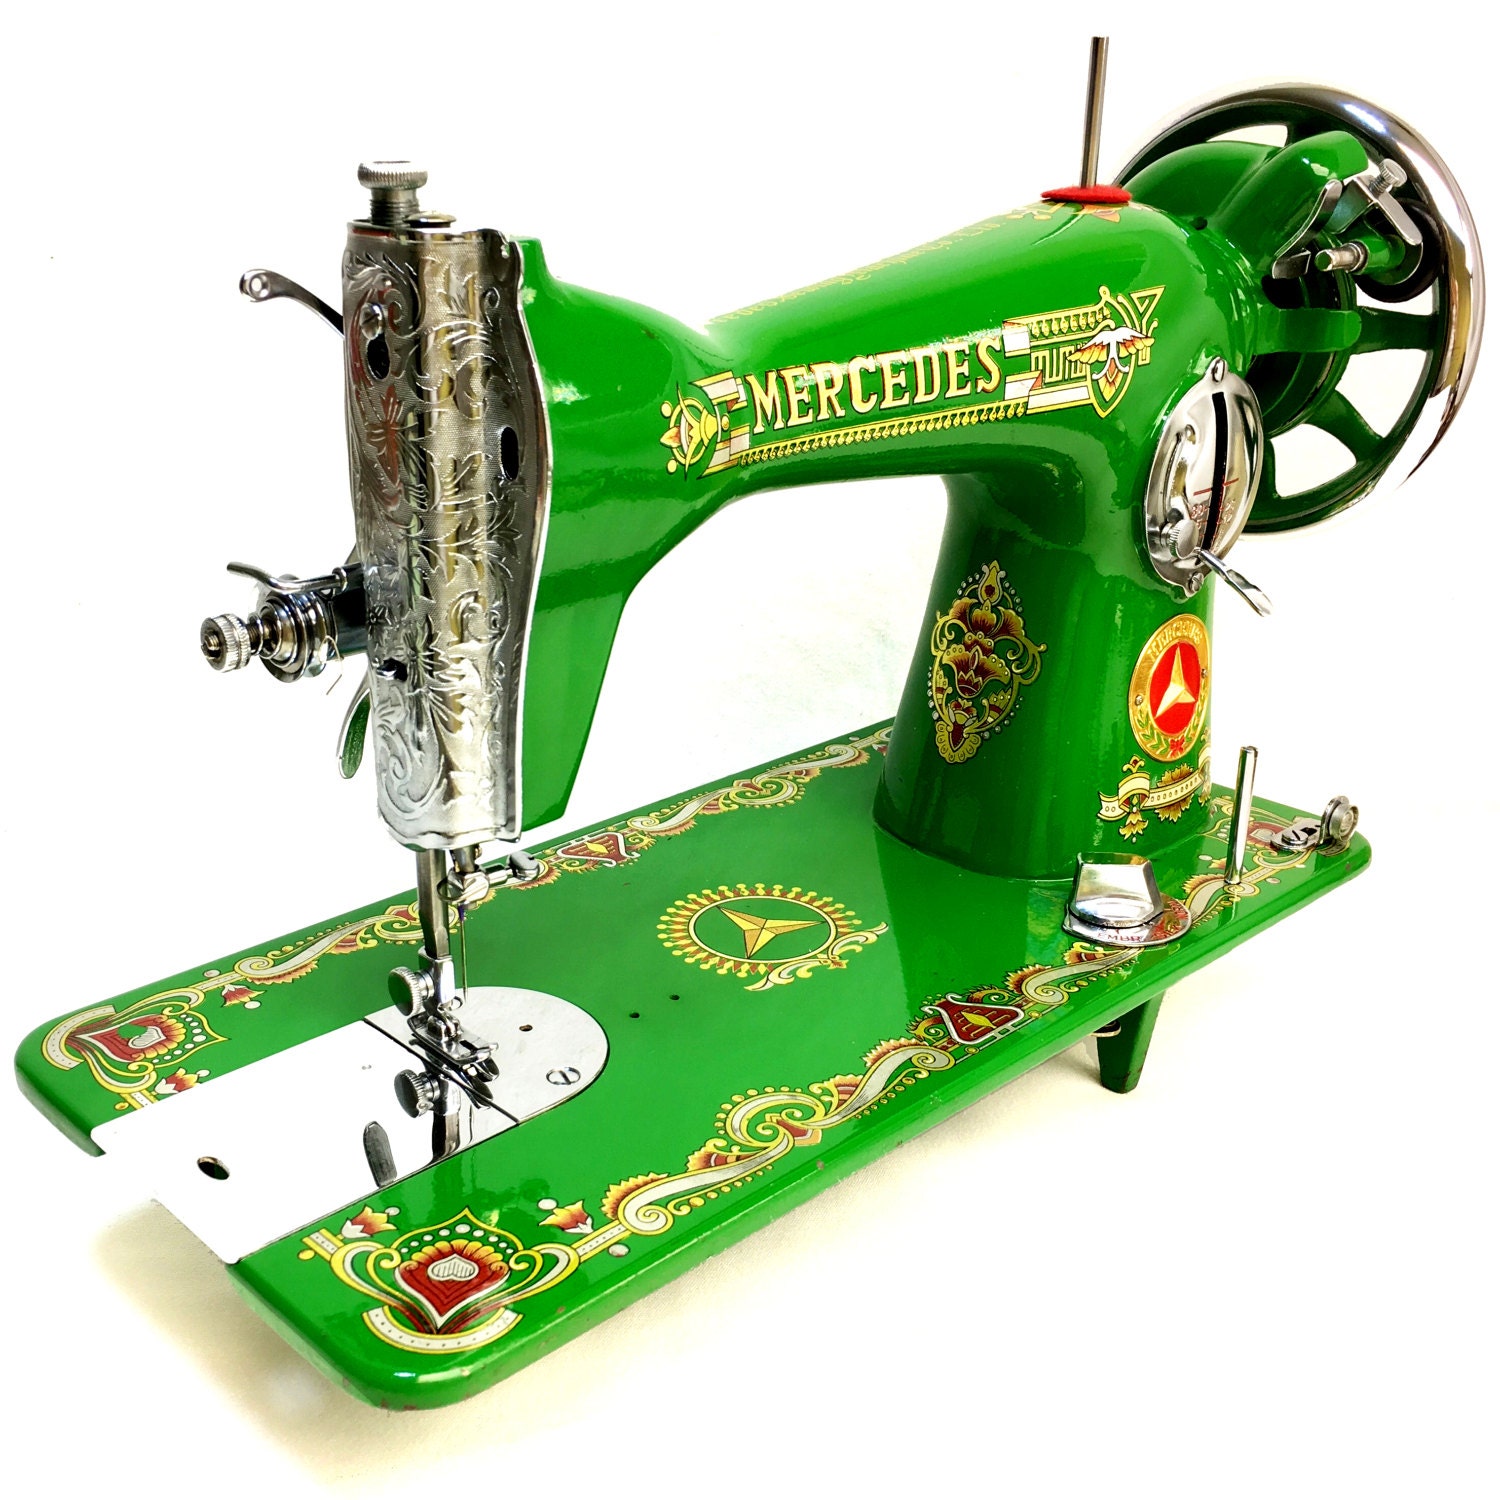 Singer Heavy Duty Sewing Machine Handwheel Upgrade for Models: 4452, 4432,  4411, 4423 HD 6380 Corners and Curves Sewing Made Easy 